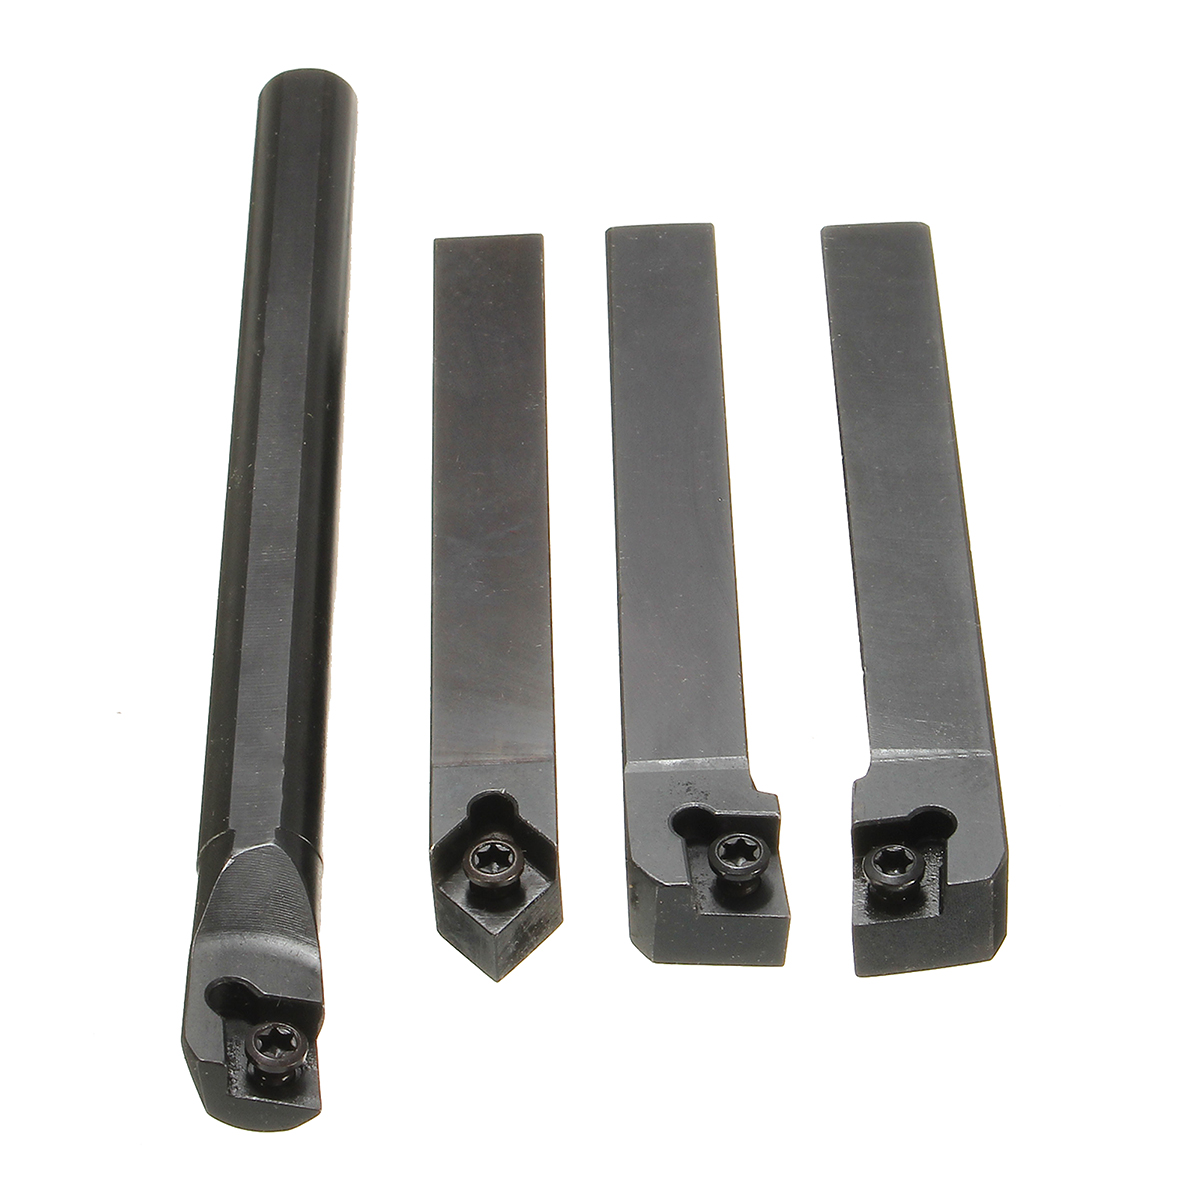 4pcs-12mm-Shank-External-Turning-Tool-with-CCMT09T304-Carbide-Inserts-CNC-Machine-Tools-Turning-1615867-7